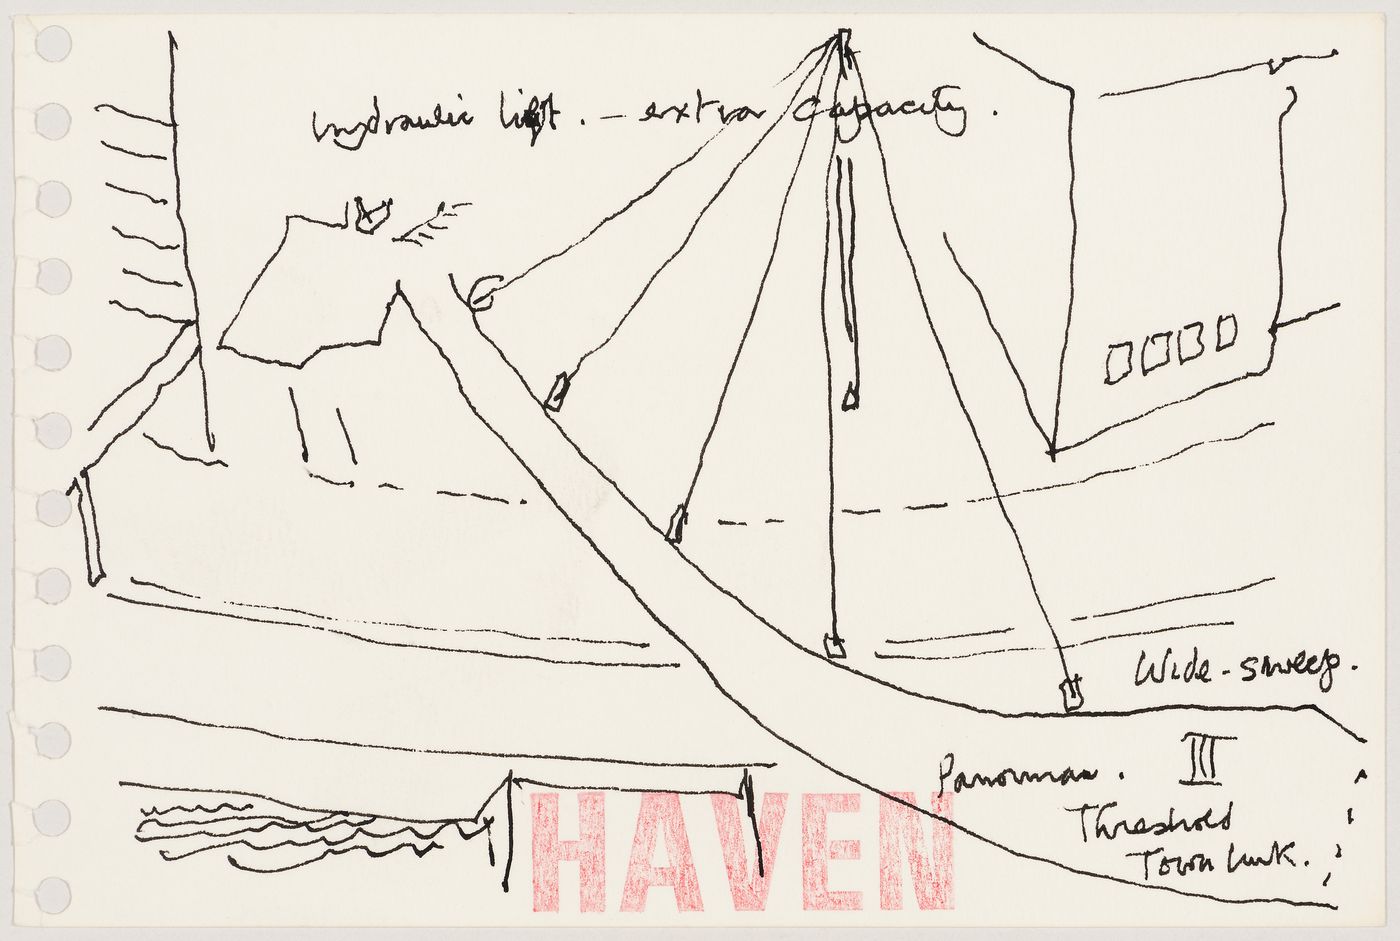 Haven: sketch of extra capacity hydraulic lift